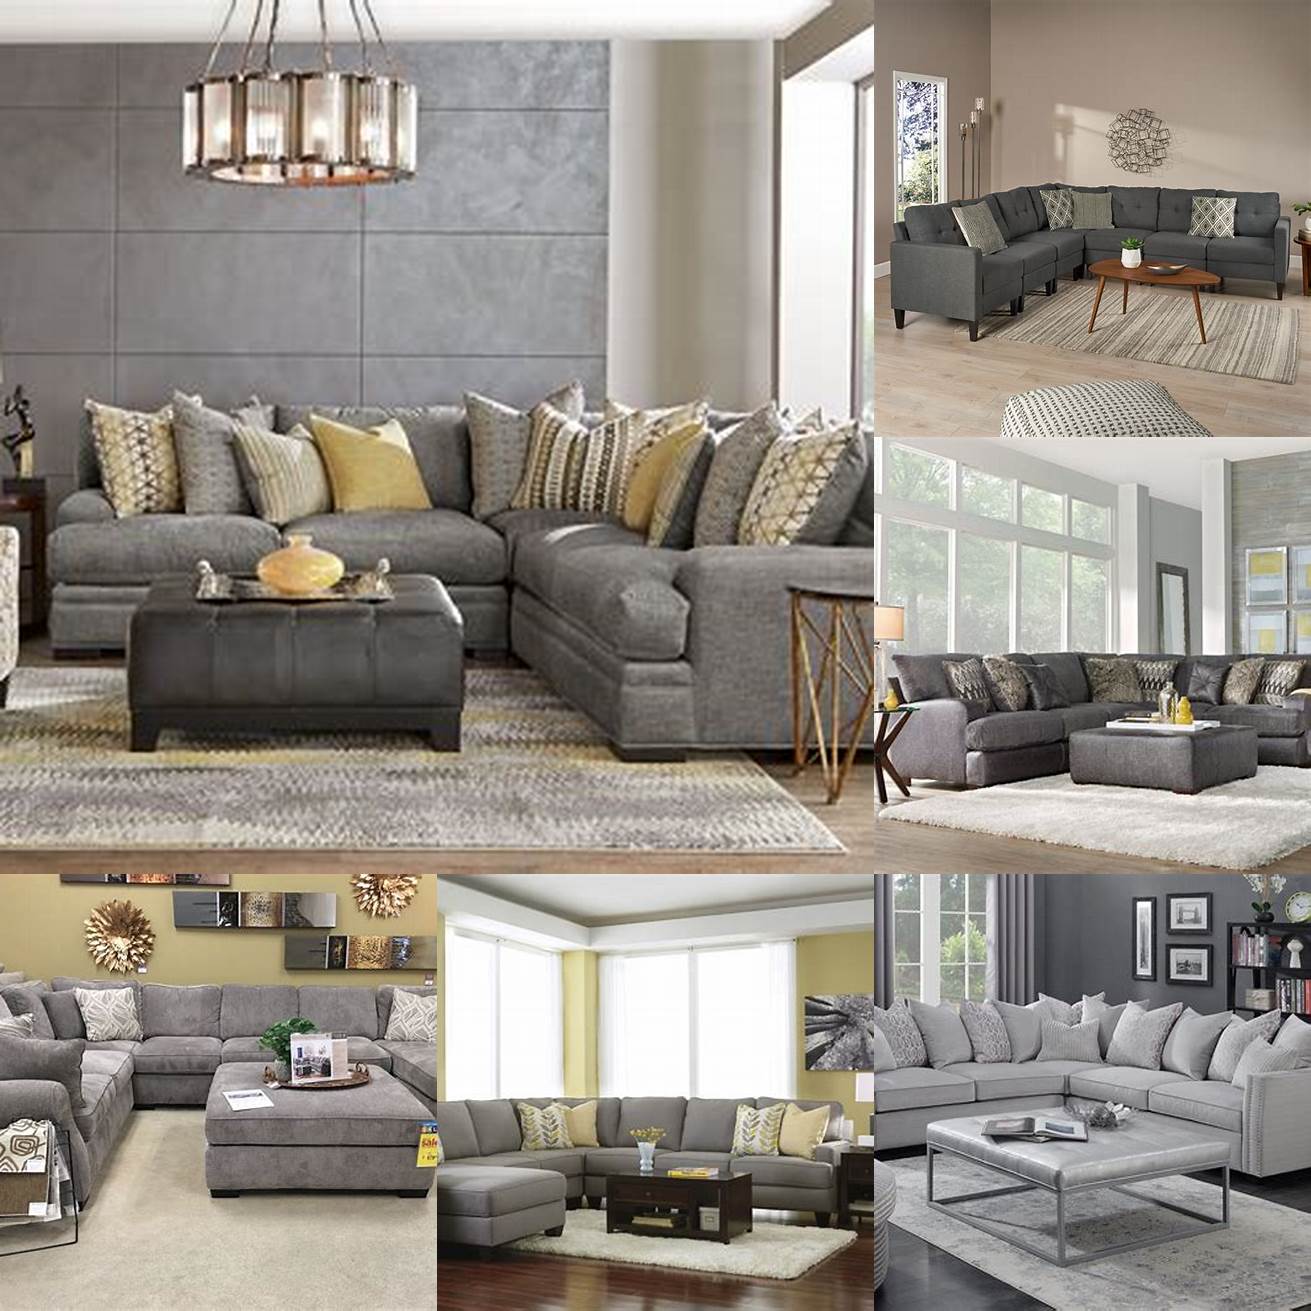 A 3 piece sectional sofa in grey color adds sophistication to your living room